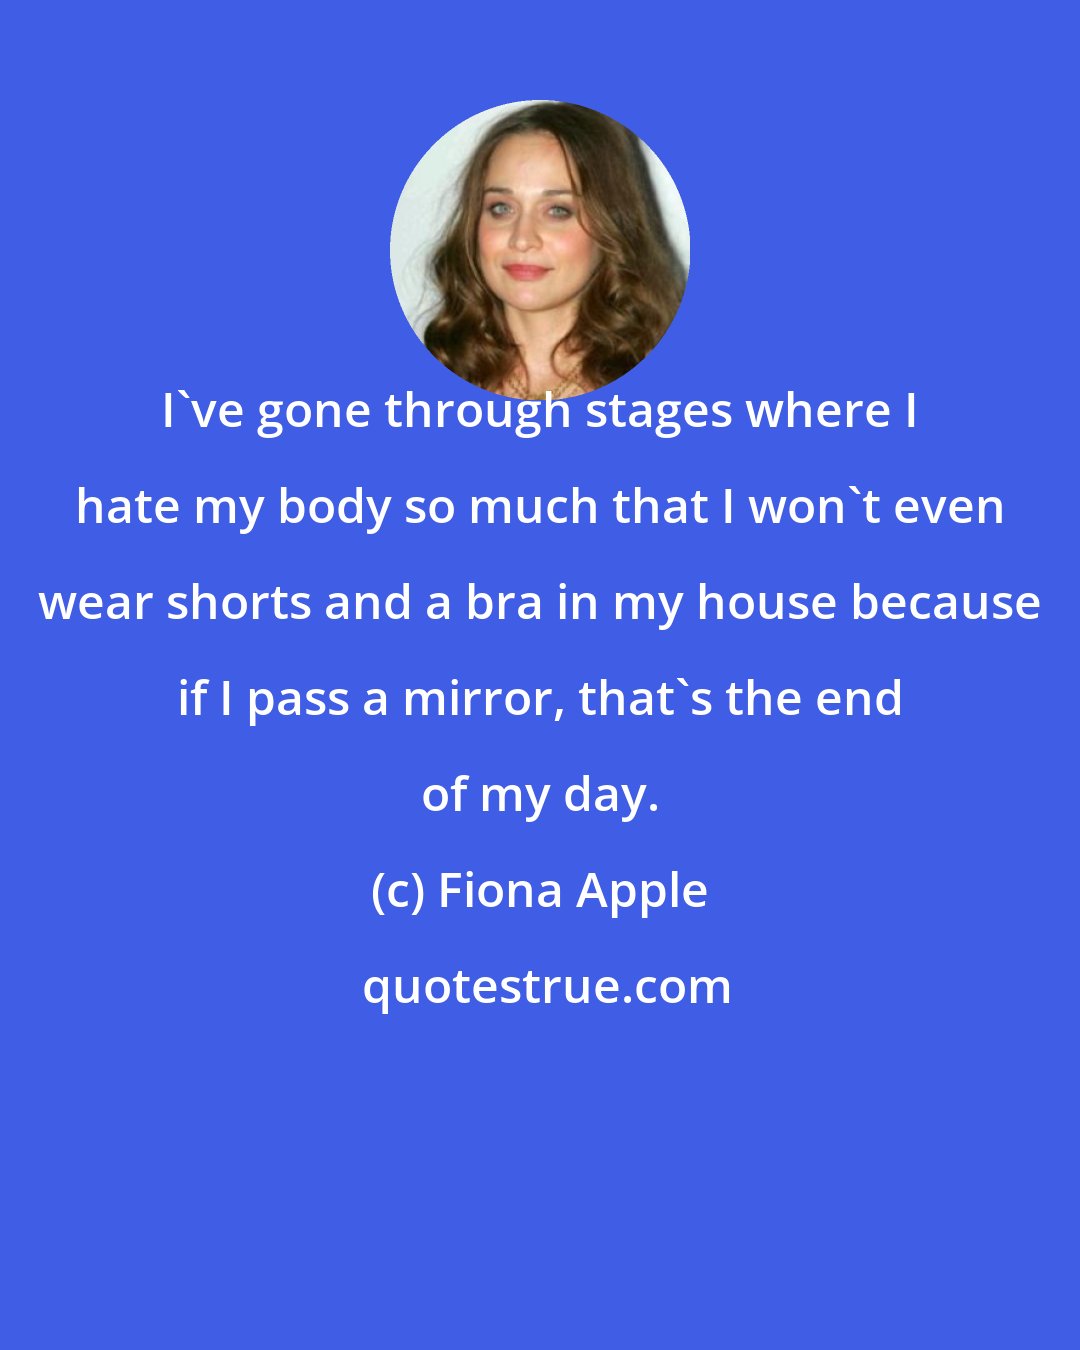 Fiona Apple: I've gone through stages where I hate my body so much that I won't even wear shorts and a bra in my house because if I pass a mirror, that's the end of my day.